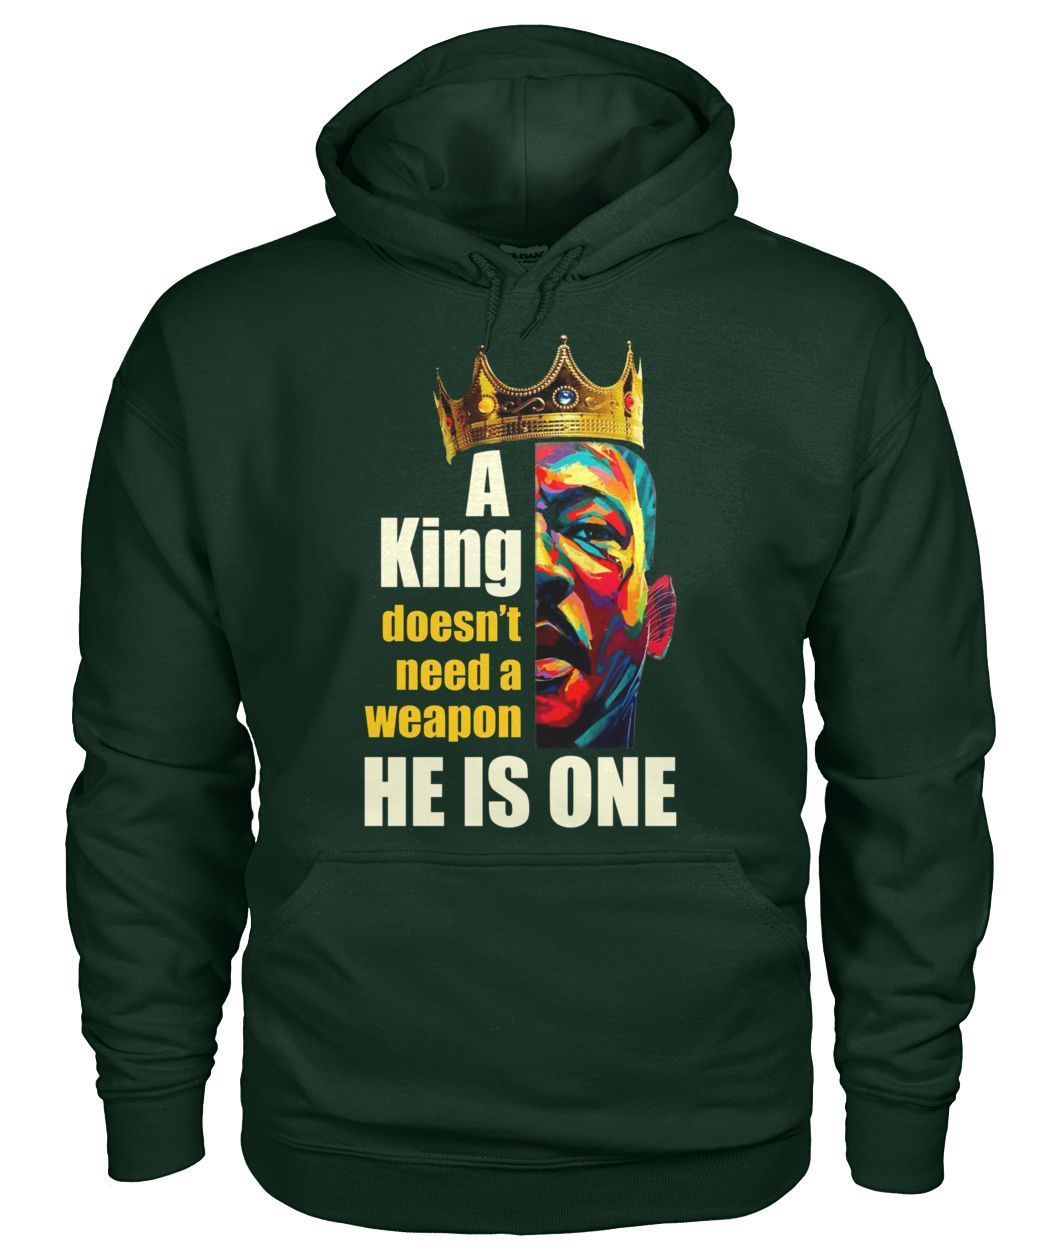 Martin luther king a king doesn't need a weapon he is one gildan hoodie